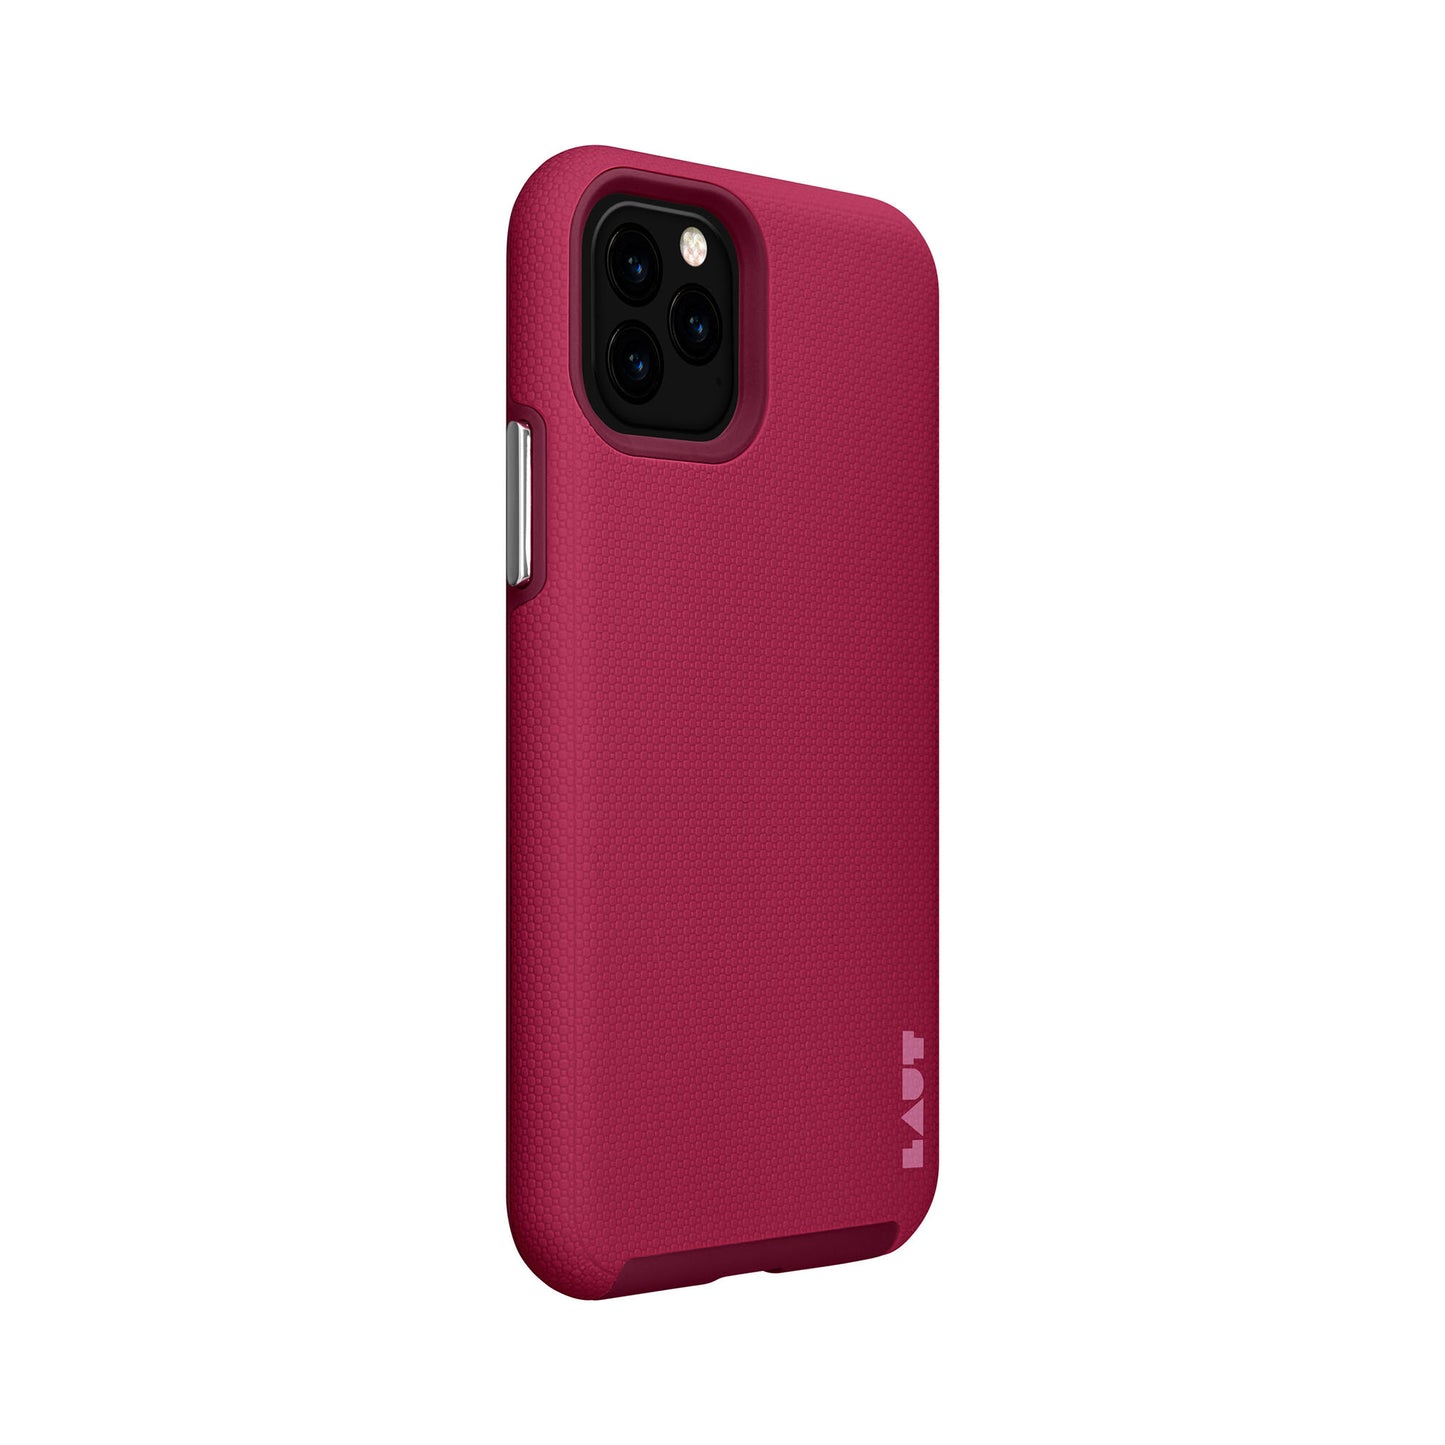 LAUT Shield for iPhone 11 Pro - Cherry